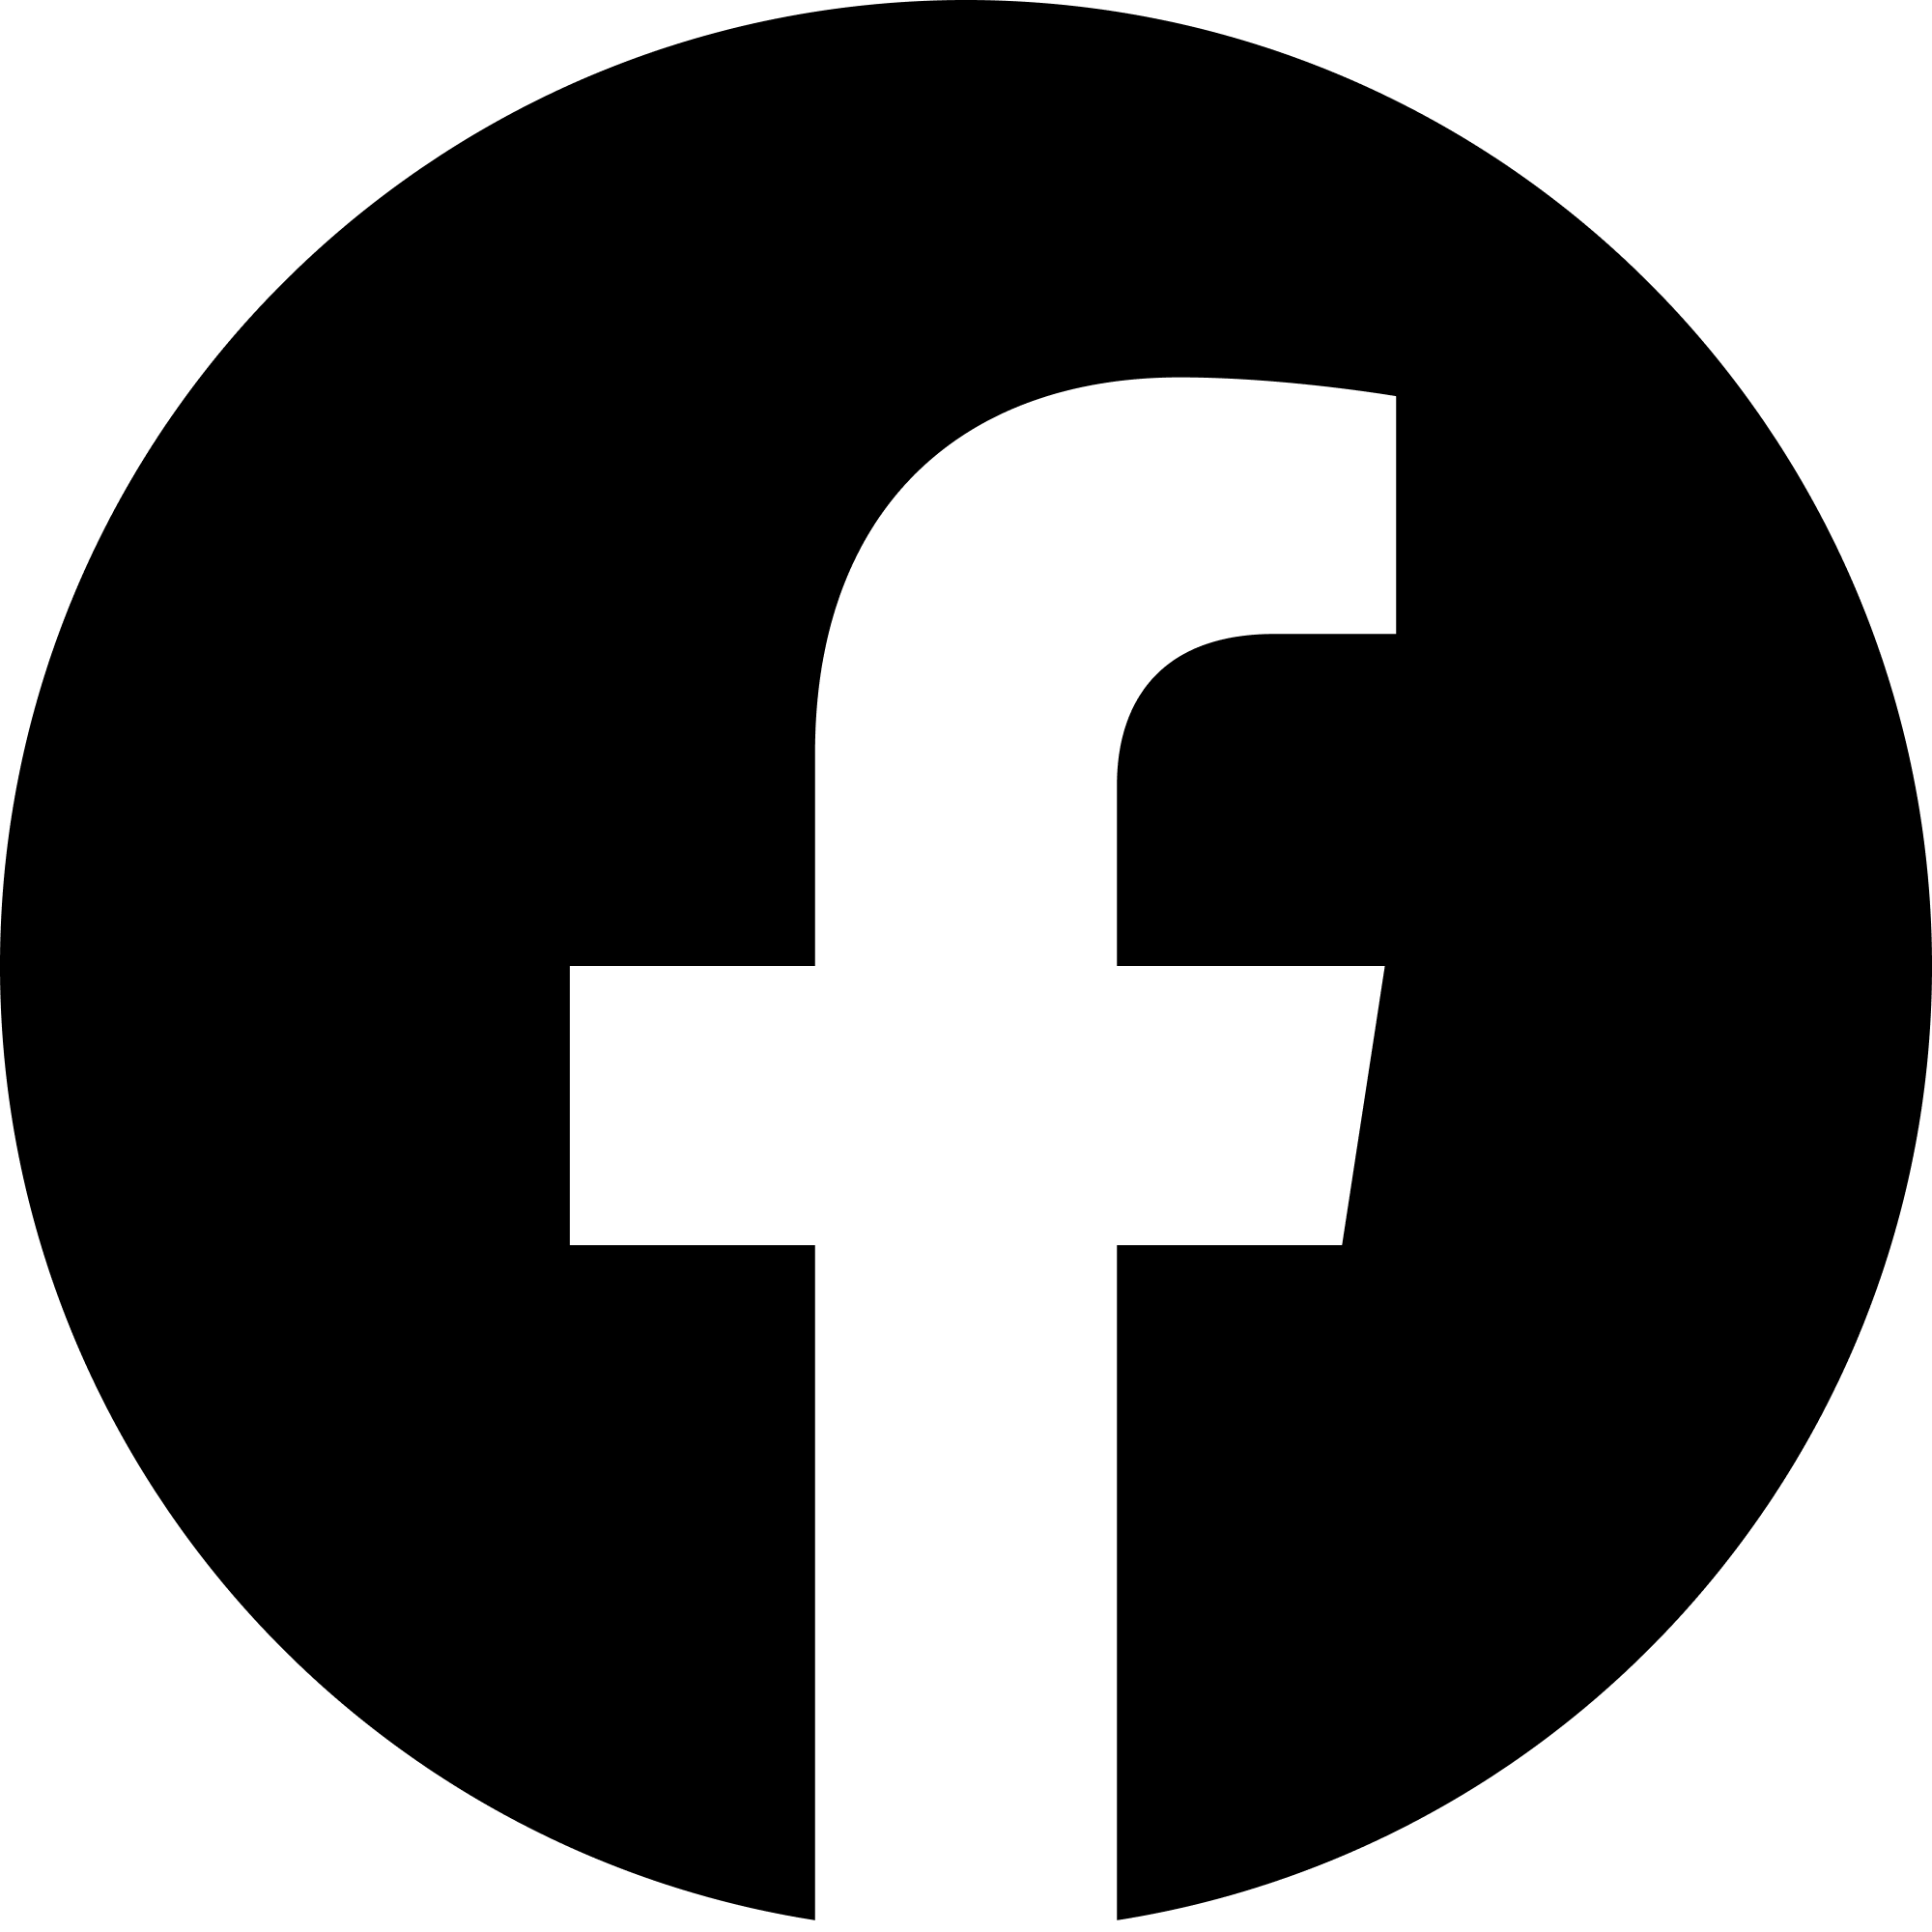 facebook logo black and white png 2000px - Lens Dazzle